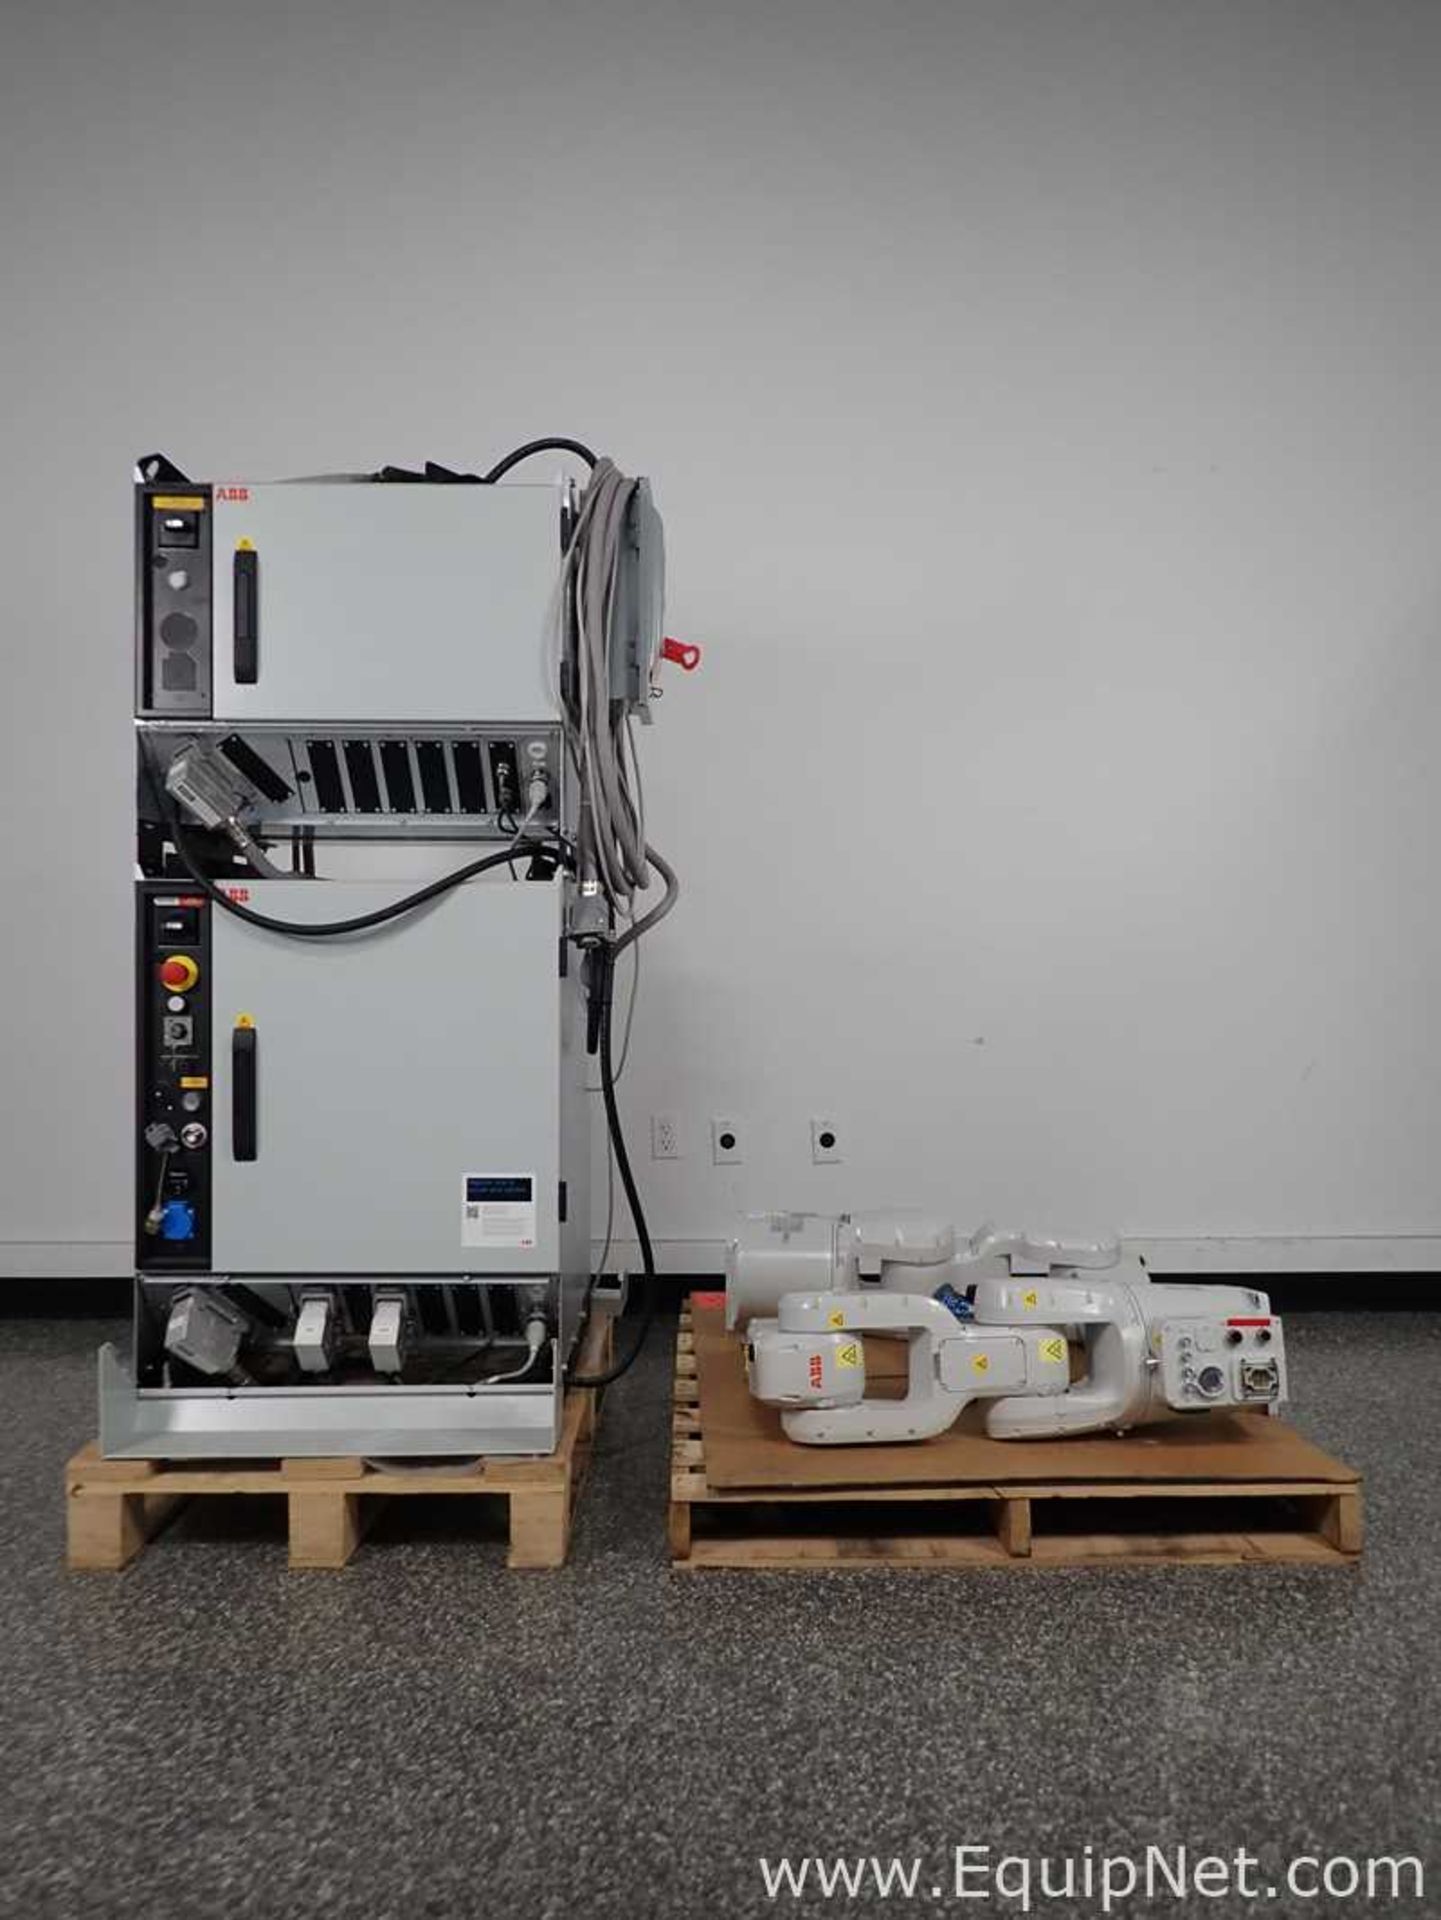 Lot of 2 ABB IRB 1200 Robotic Arms with IRC5 Industrial Controllers